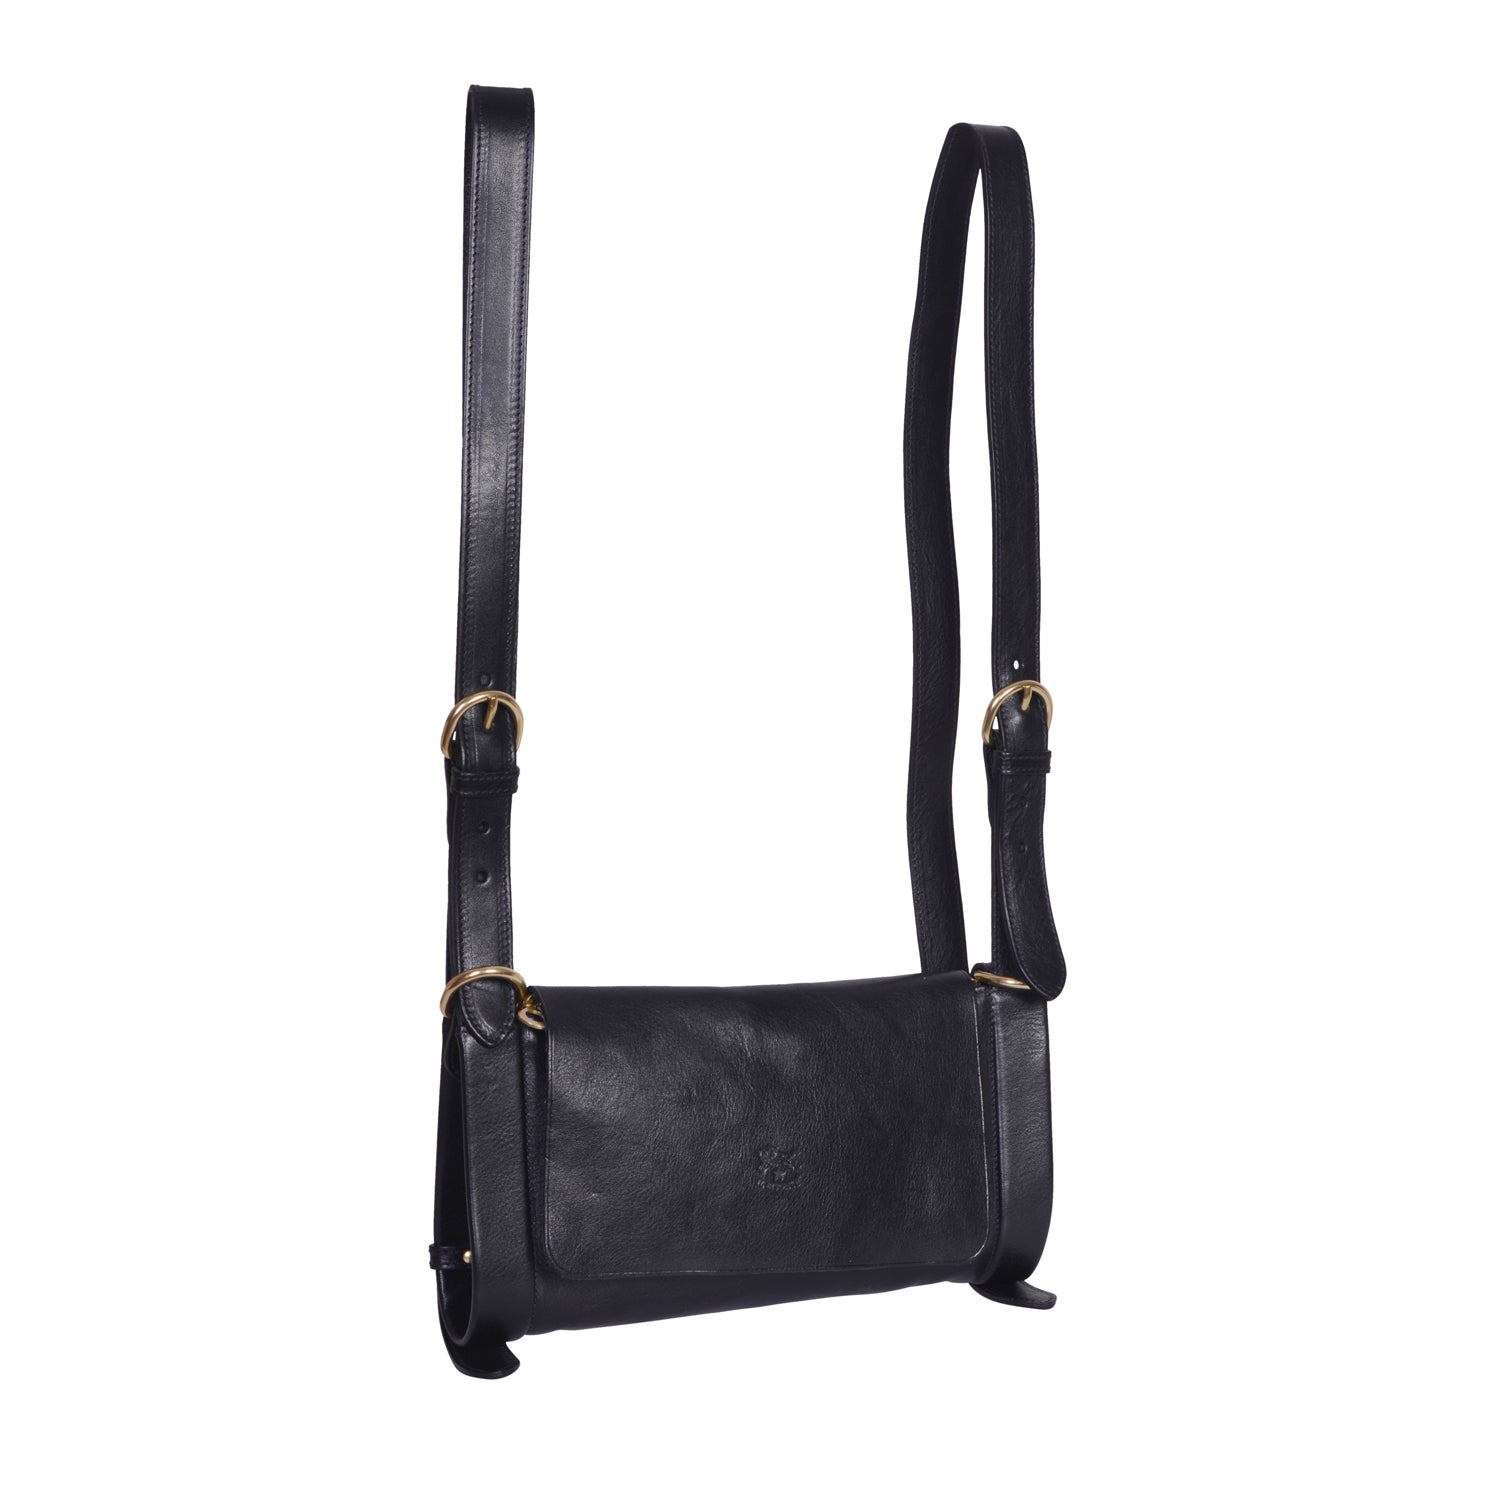 IL BISONTE ESCAPE WOMEN'S  BACKPACK  IN BLACK COWHIDE LEATHER